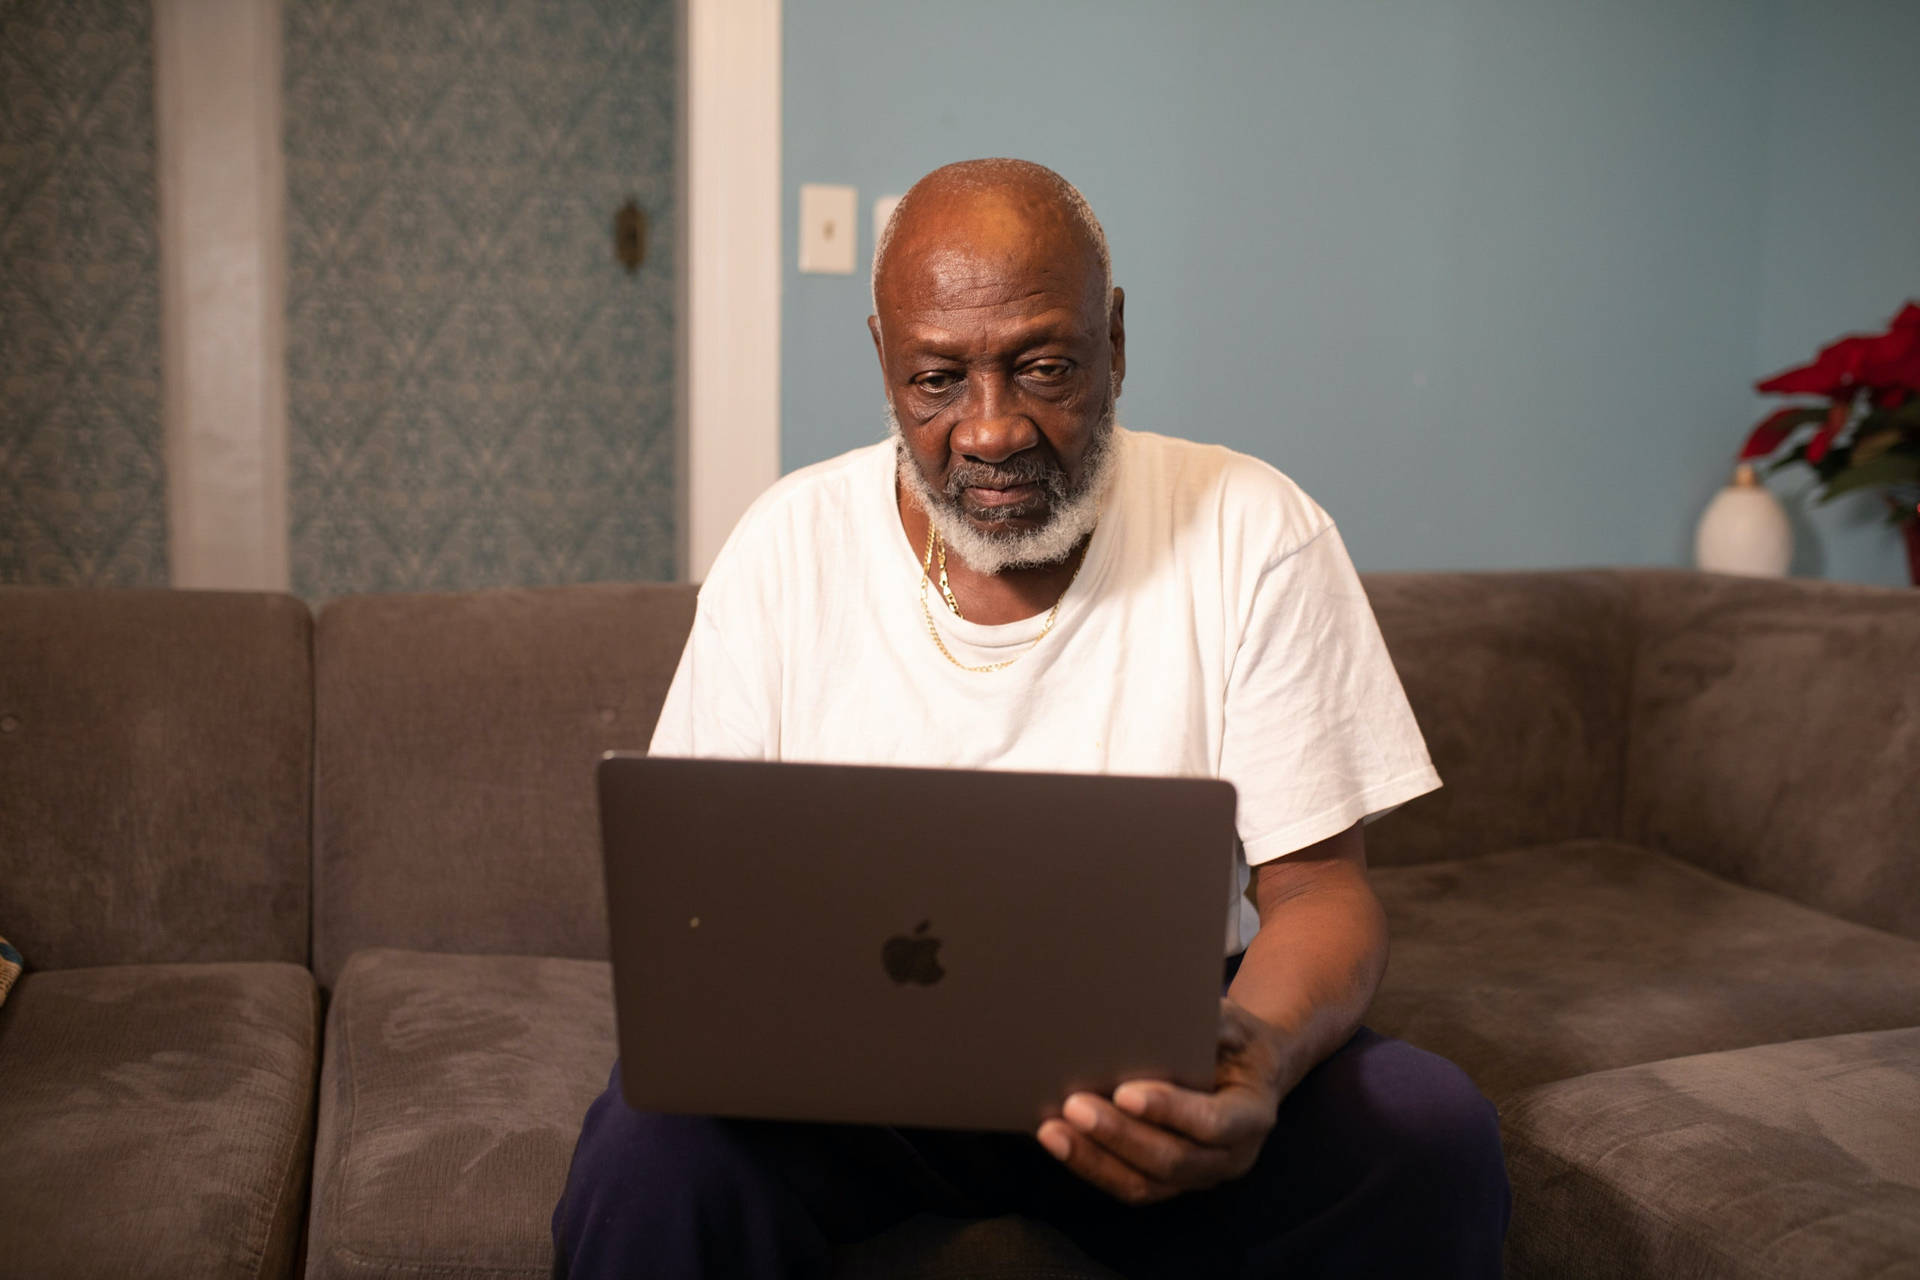 Old Black Man Using Laptop On Couch Wallpaper